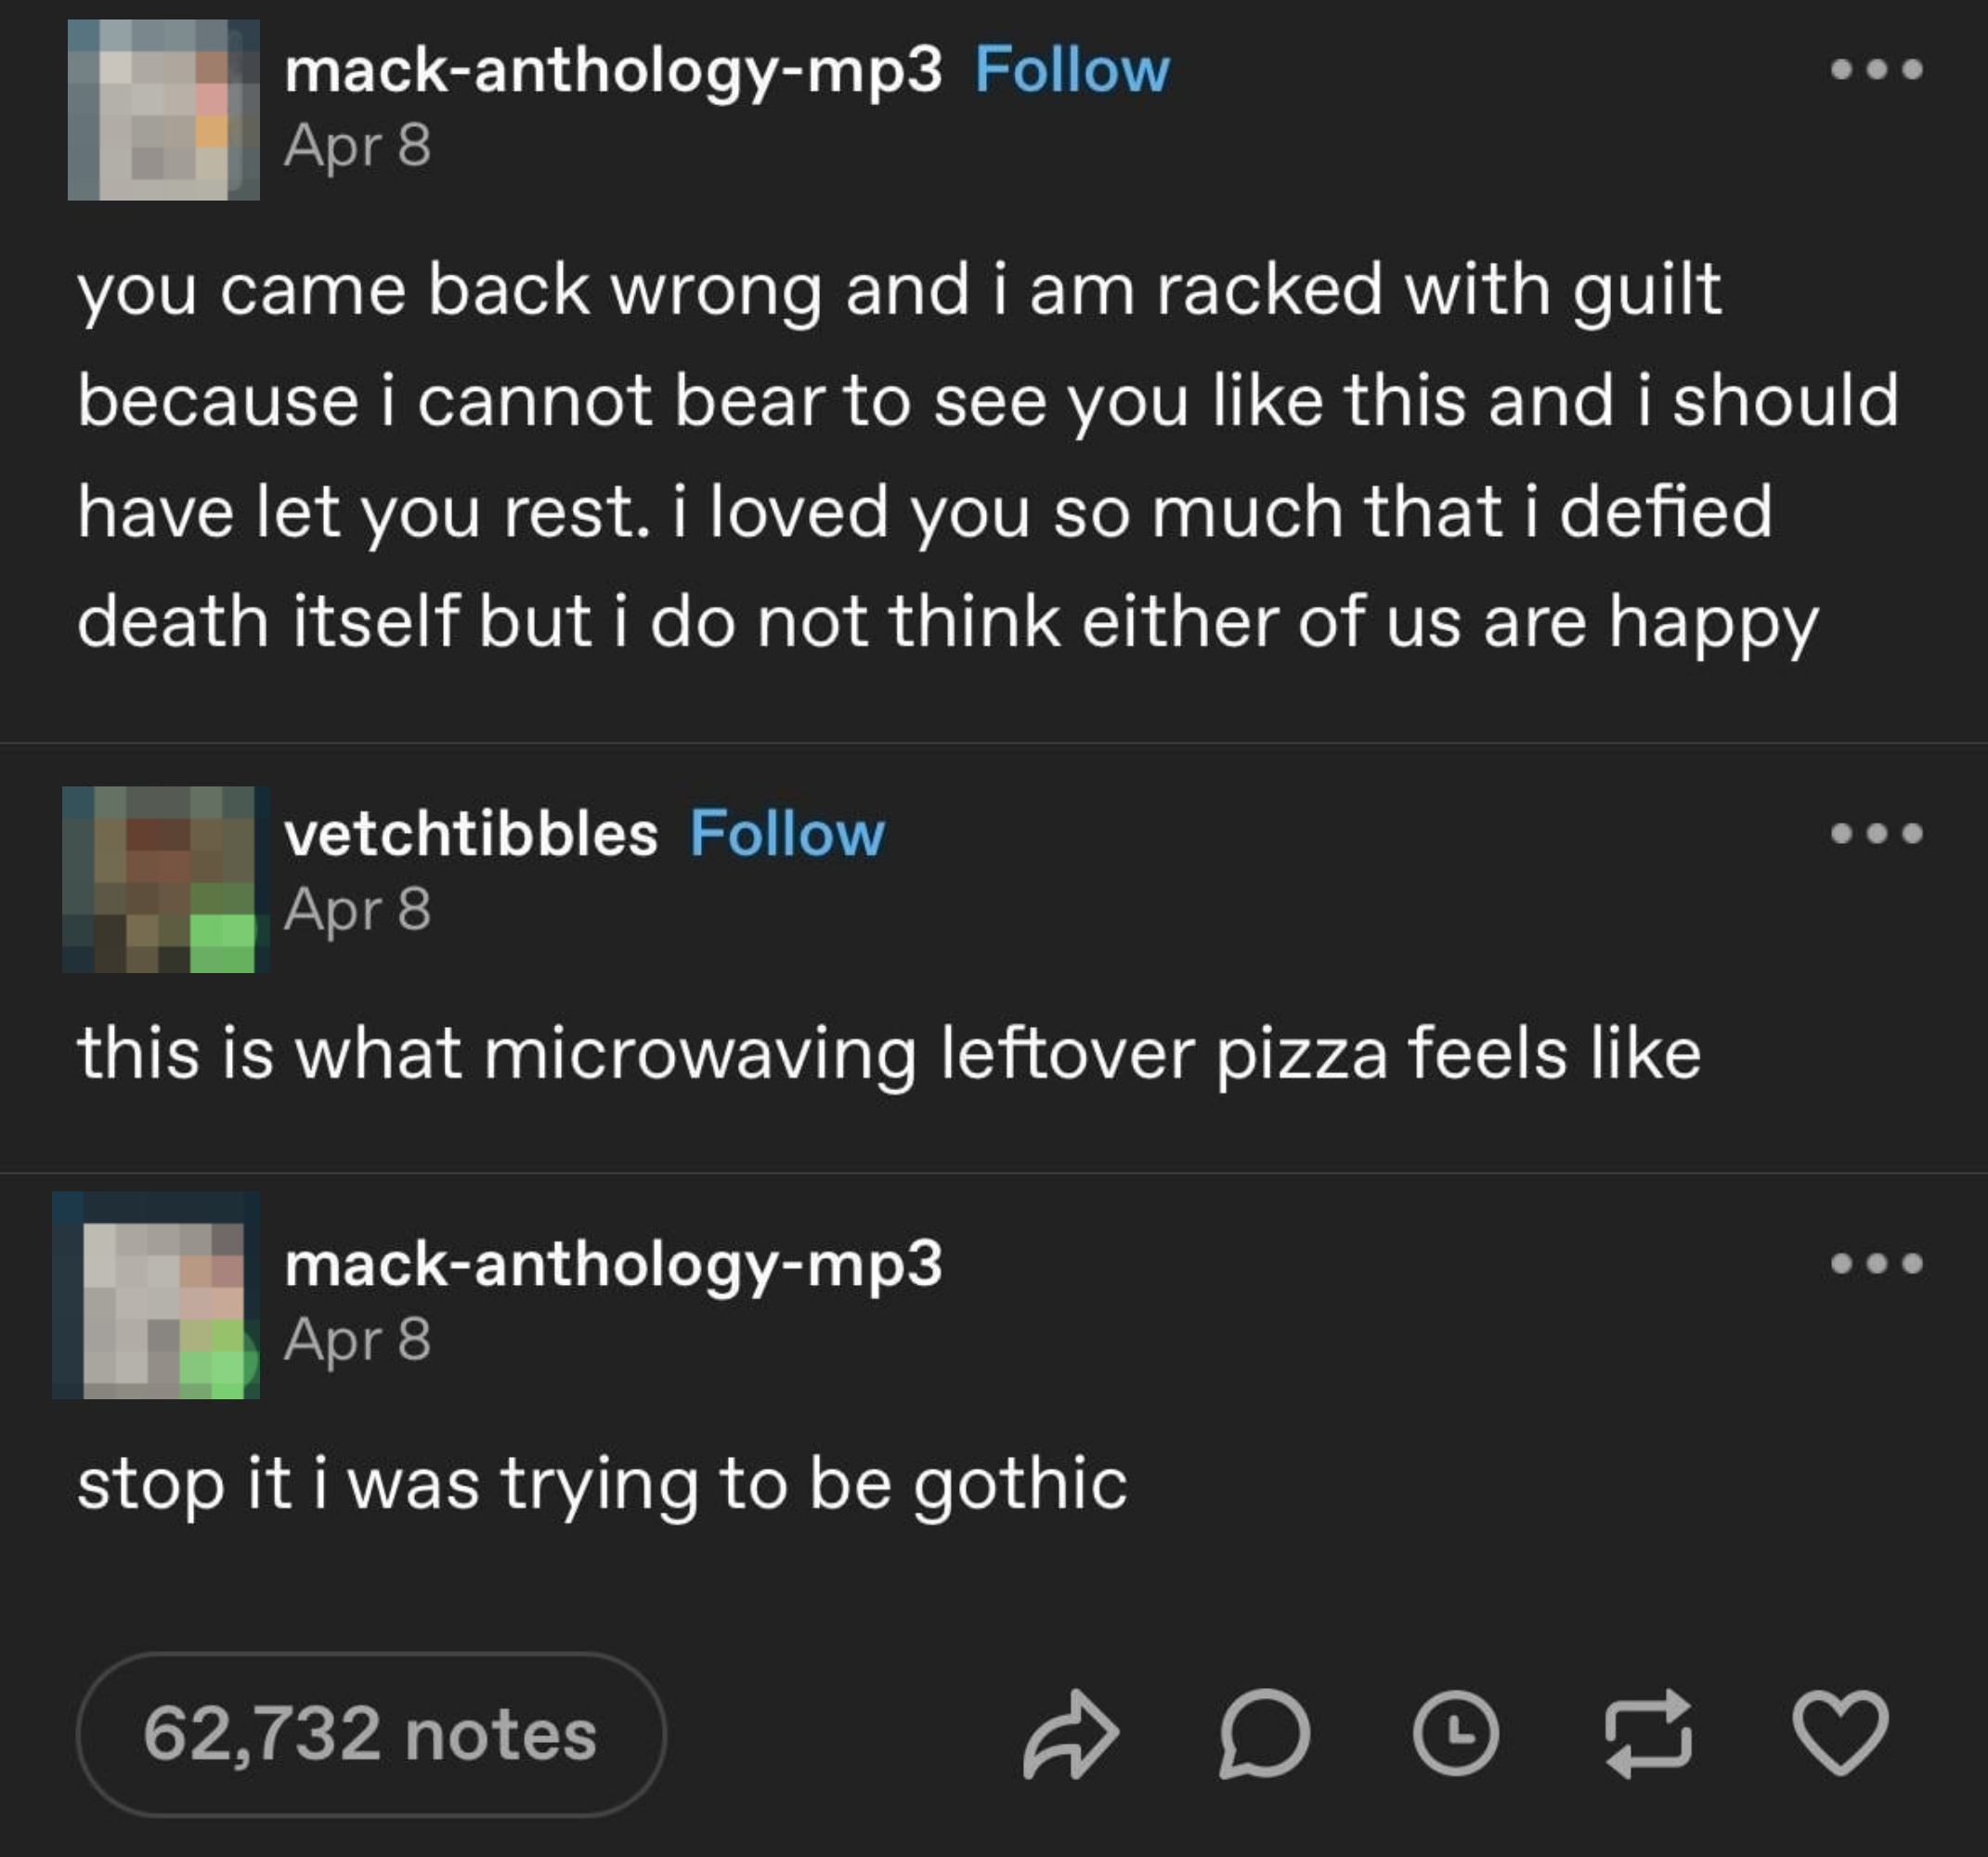 Tumbl posts comparing heartbreak to microwaving leftover pizza, humorous contrast